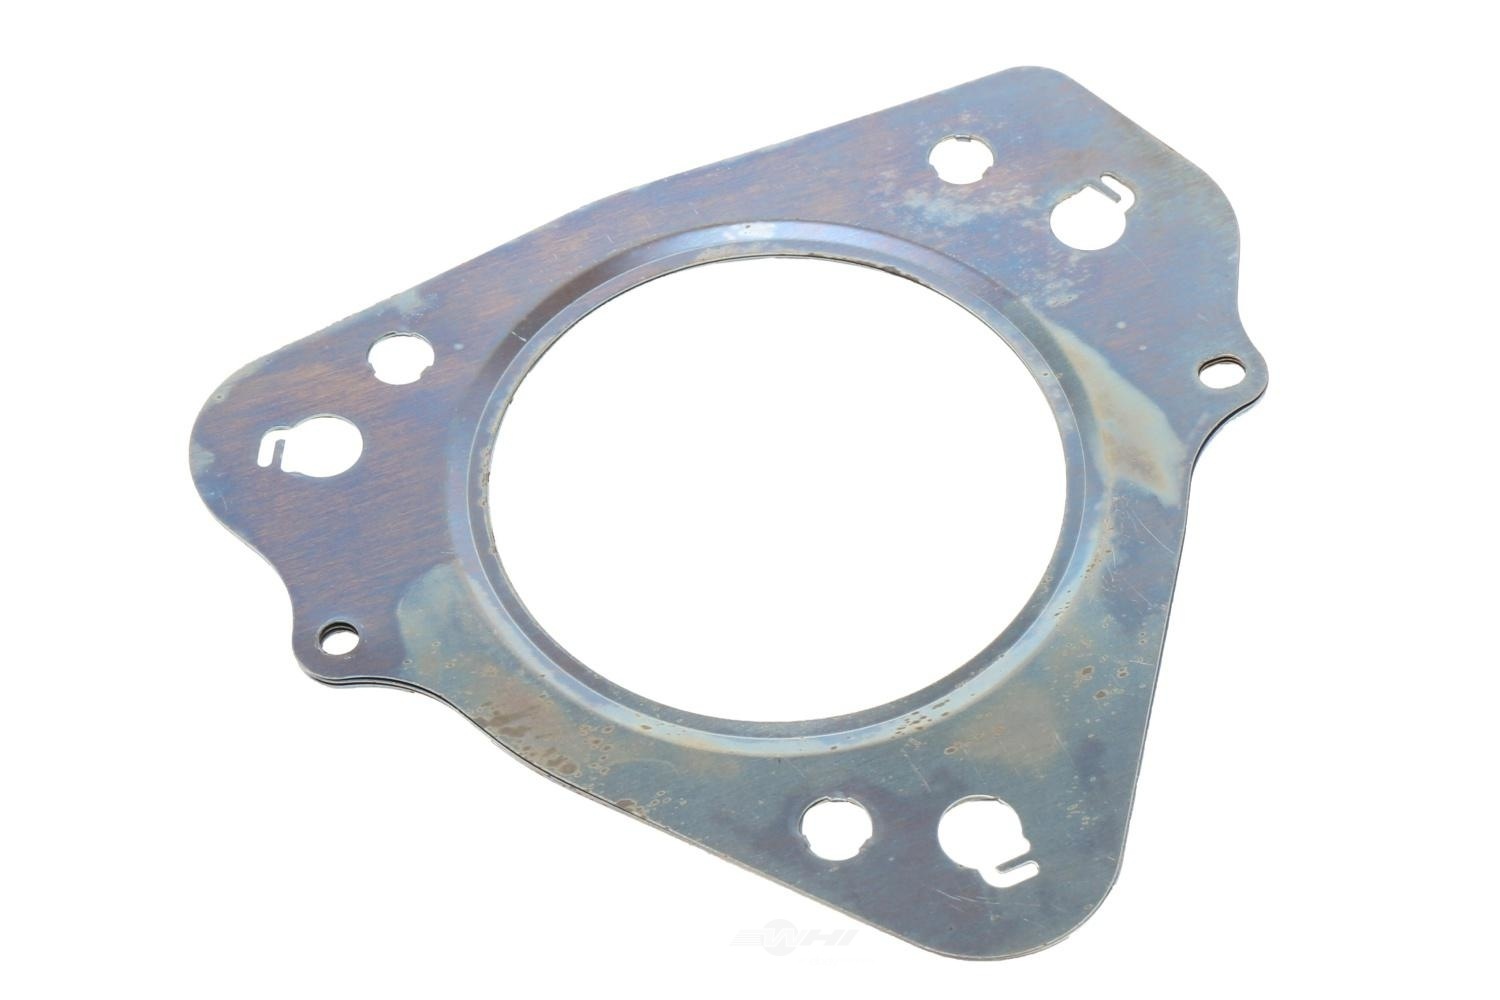 GM GENUINE PARTS - Turbocharger Inlet Gasket - GMP 12688018